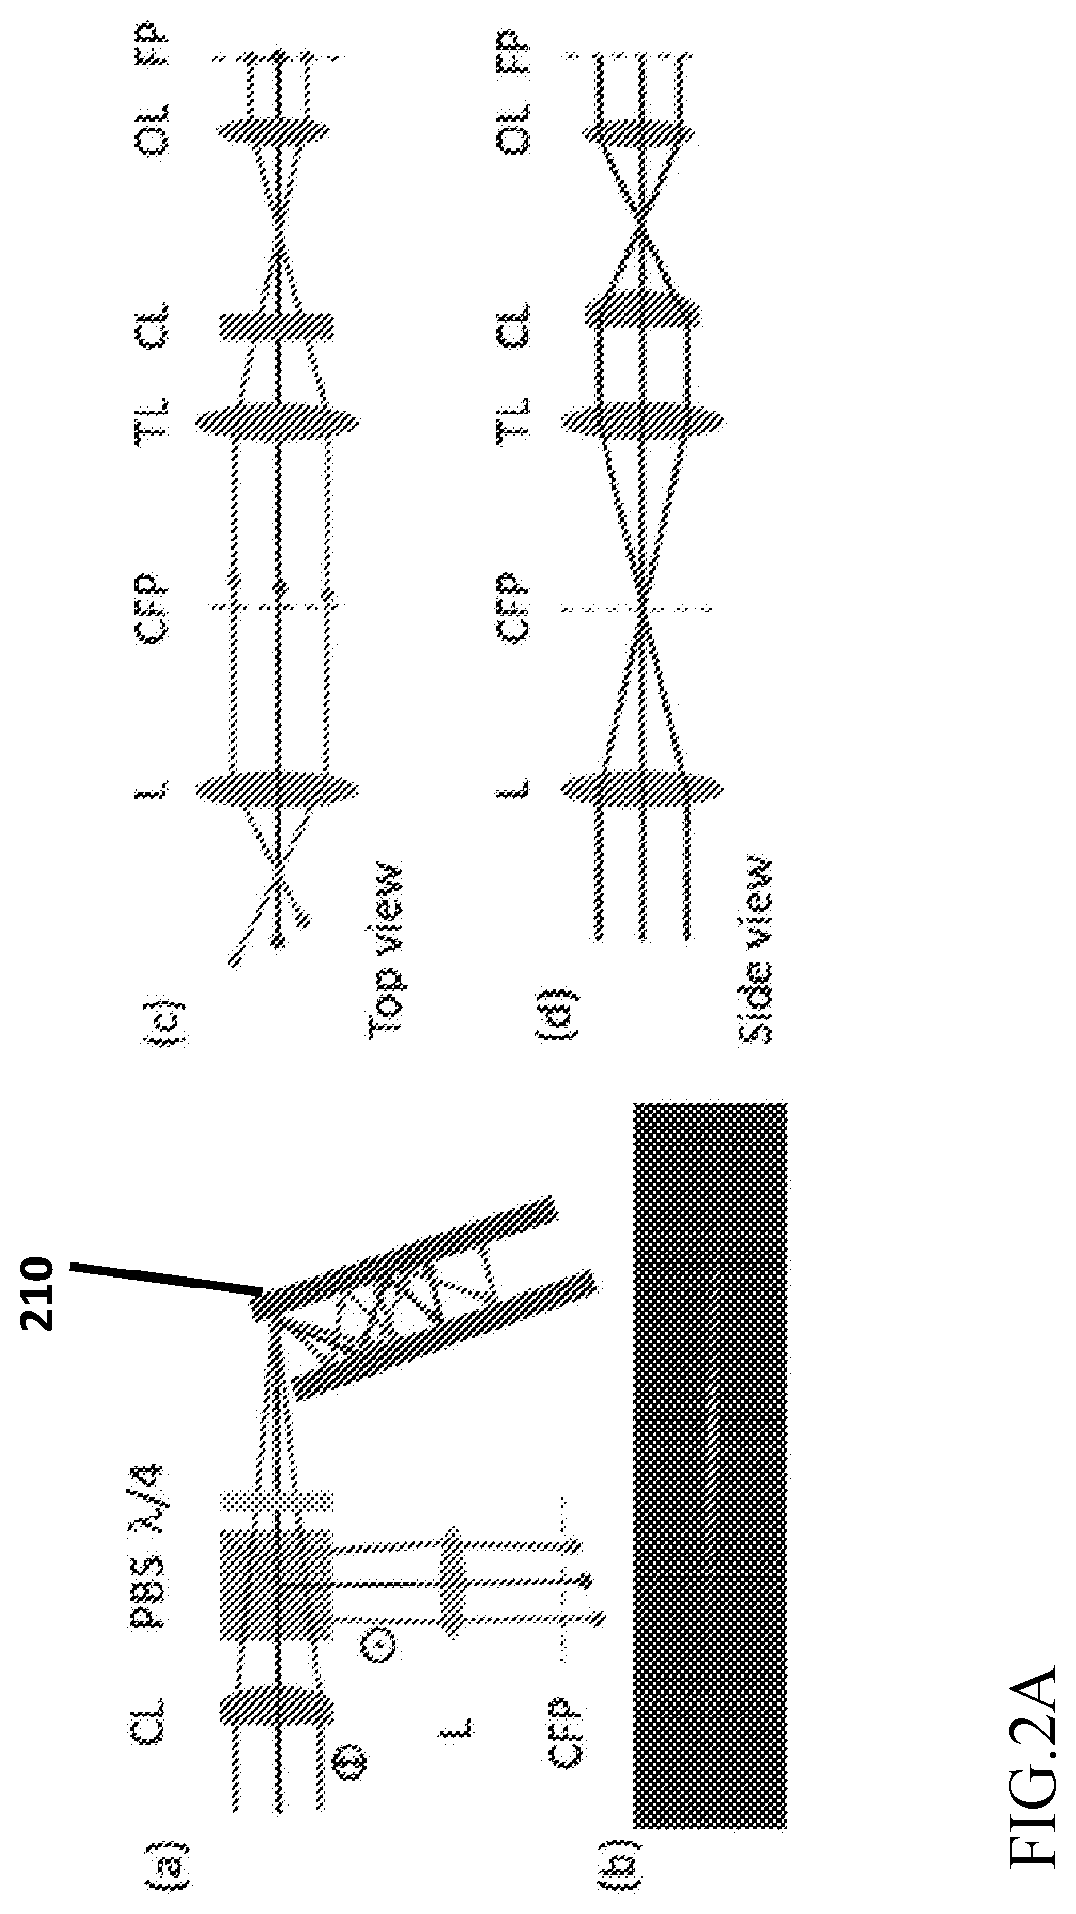 Apparatus and method for fast volumetric fluorescence microscopy using temporally multiplexed light sheets